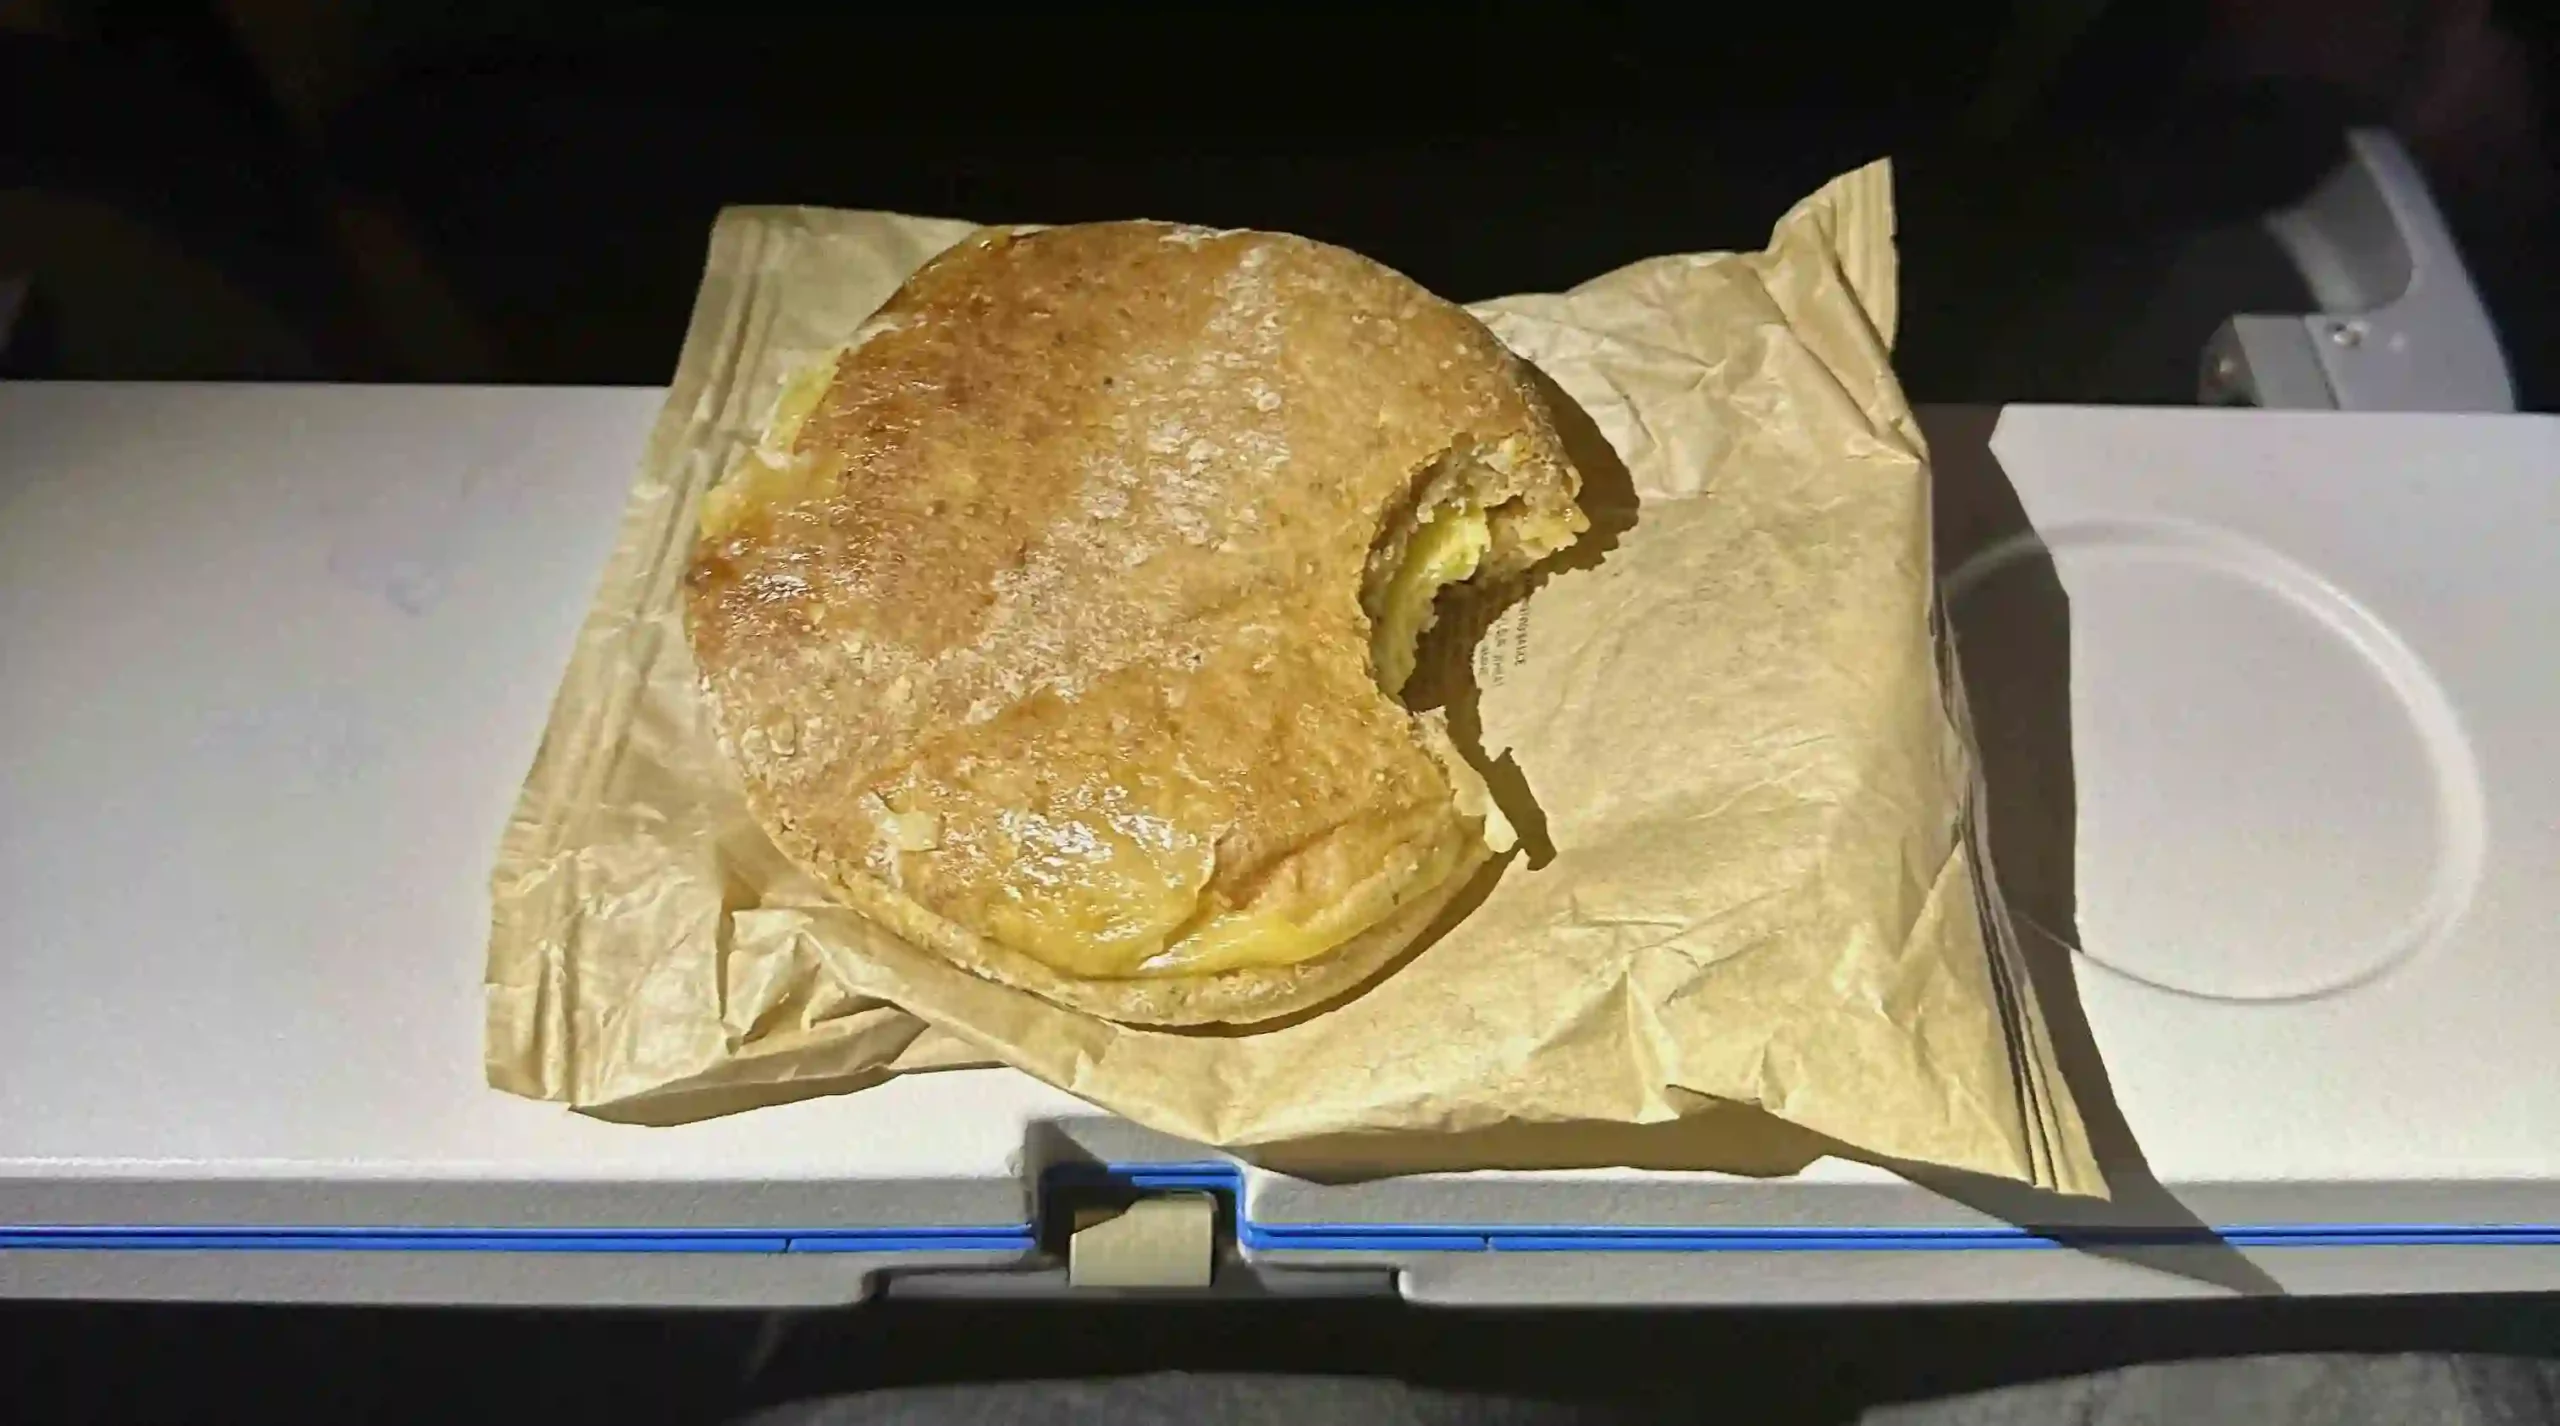 a sandwich with a bite taken out of it